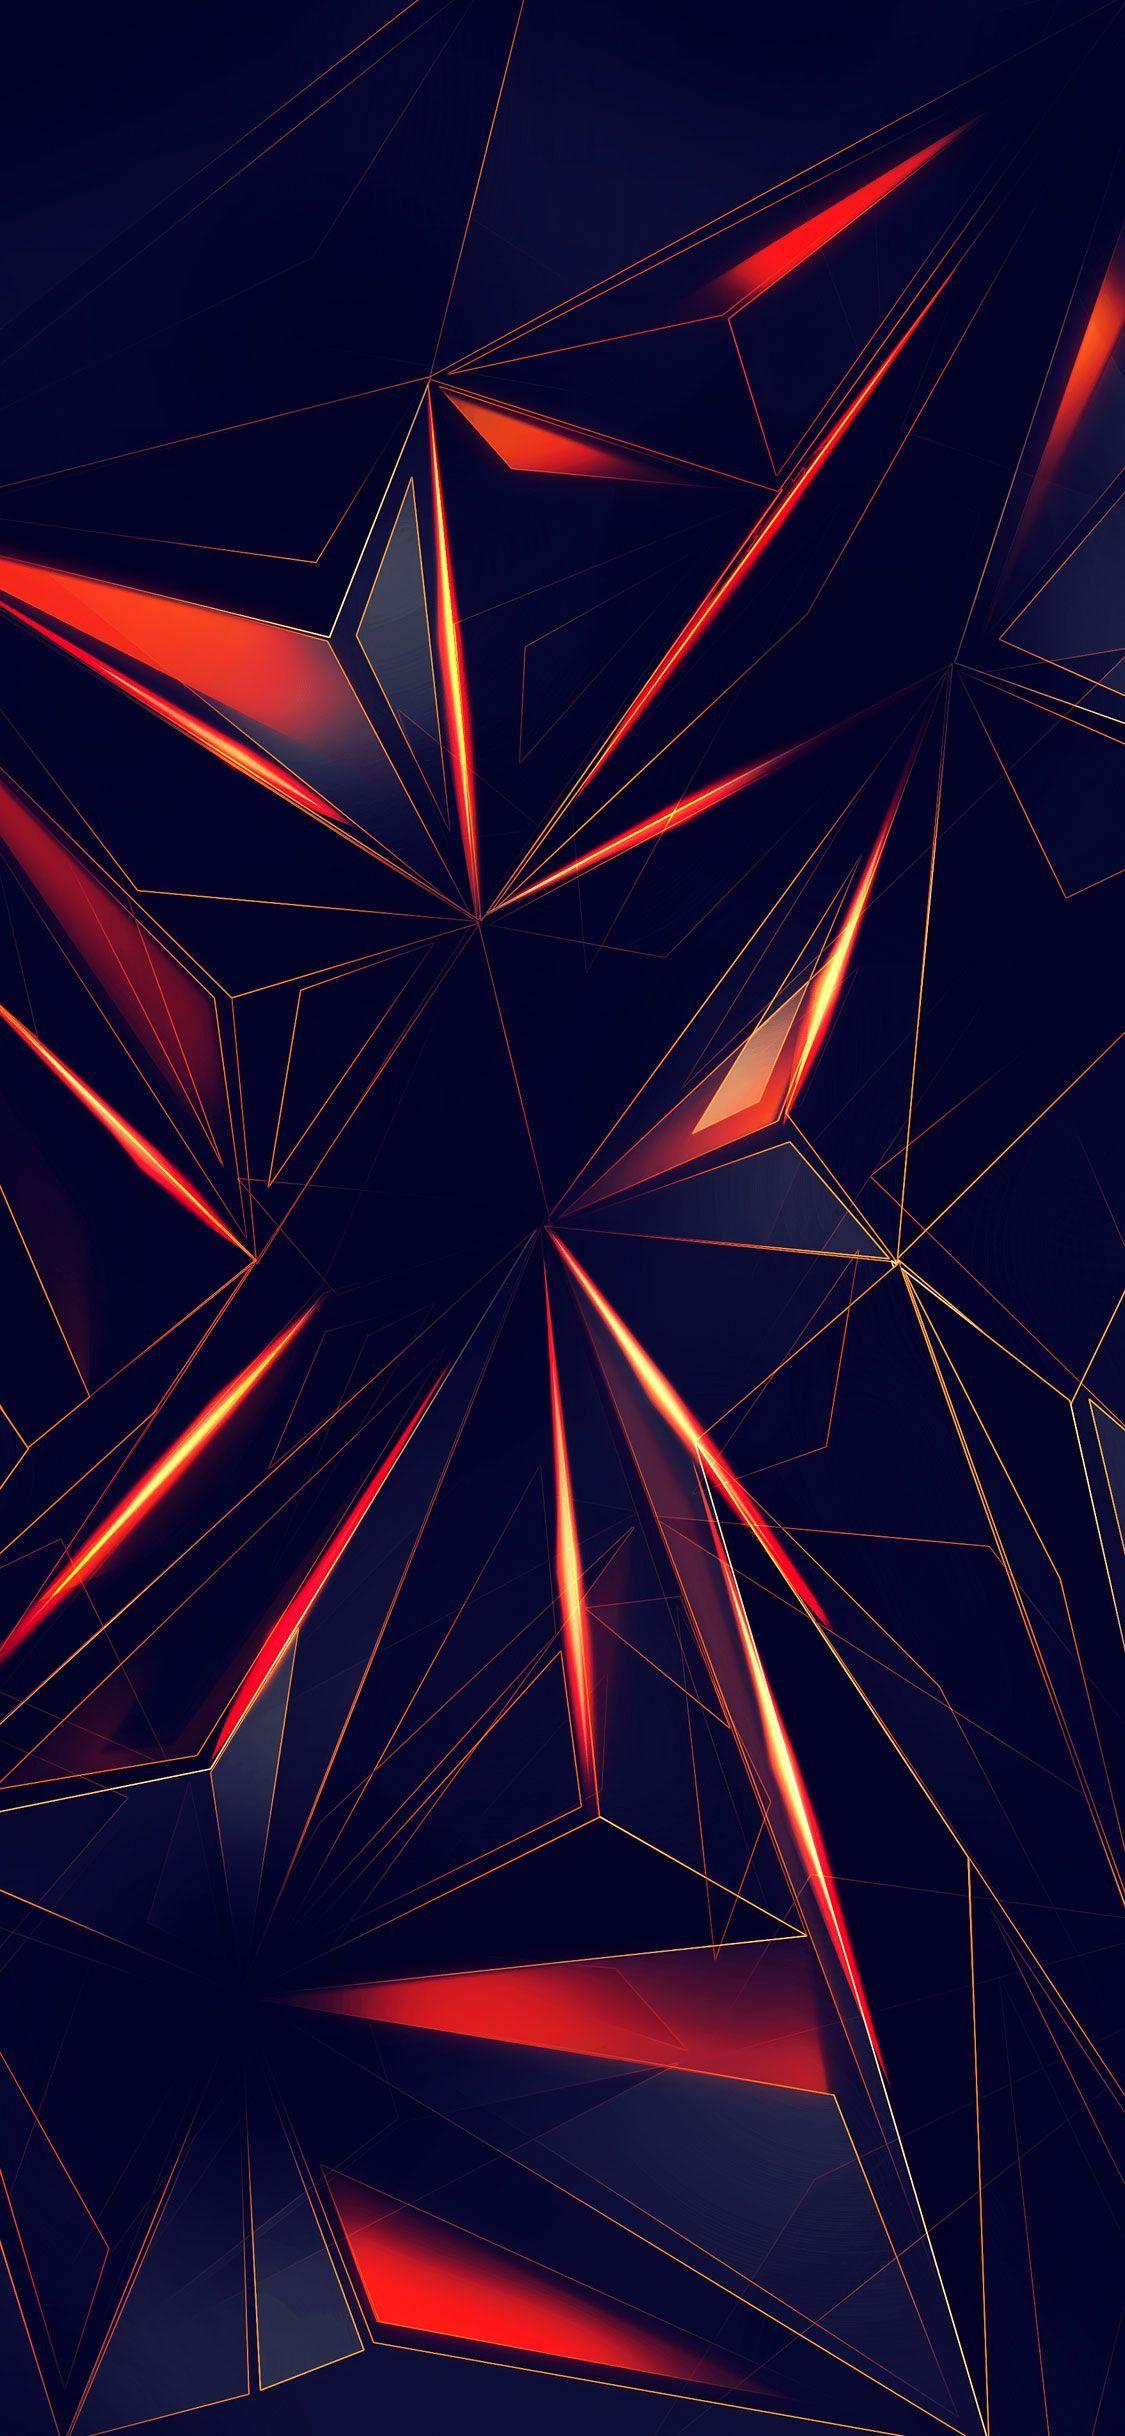 Abstract Design Iphone Wallpapers